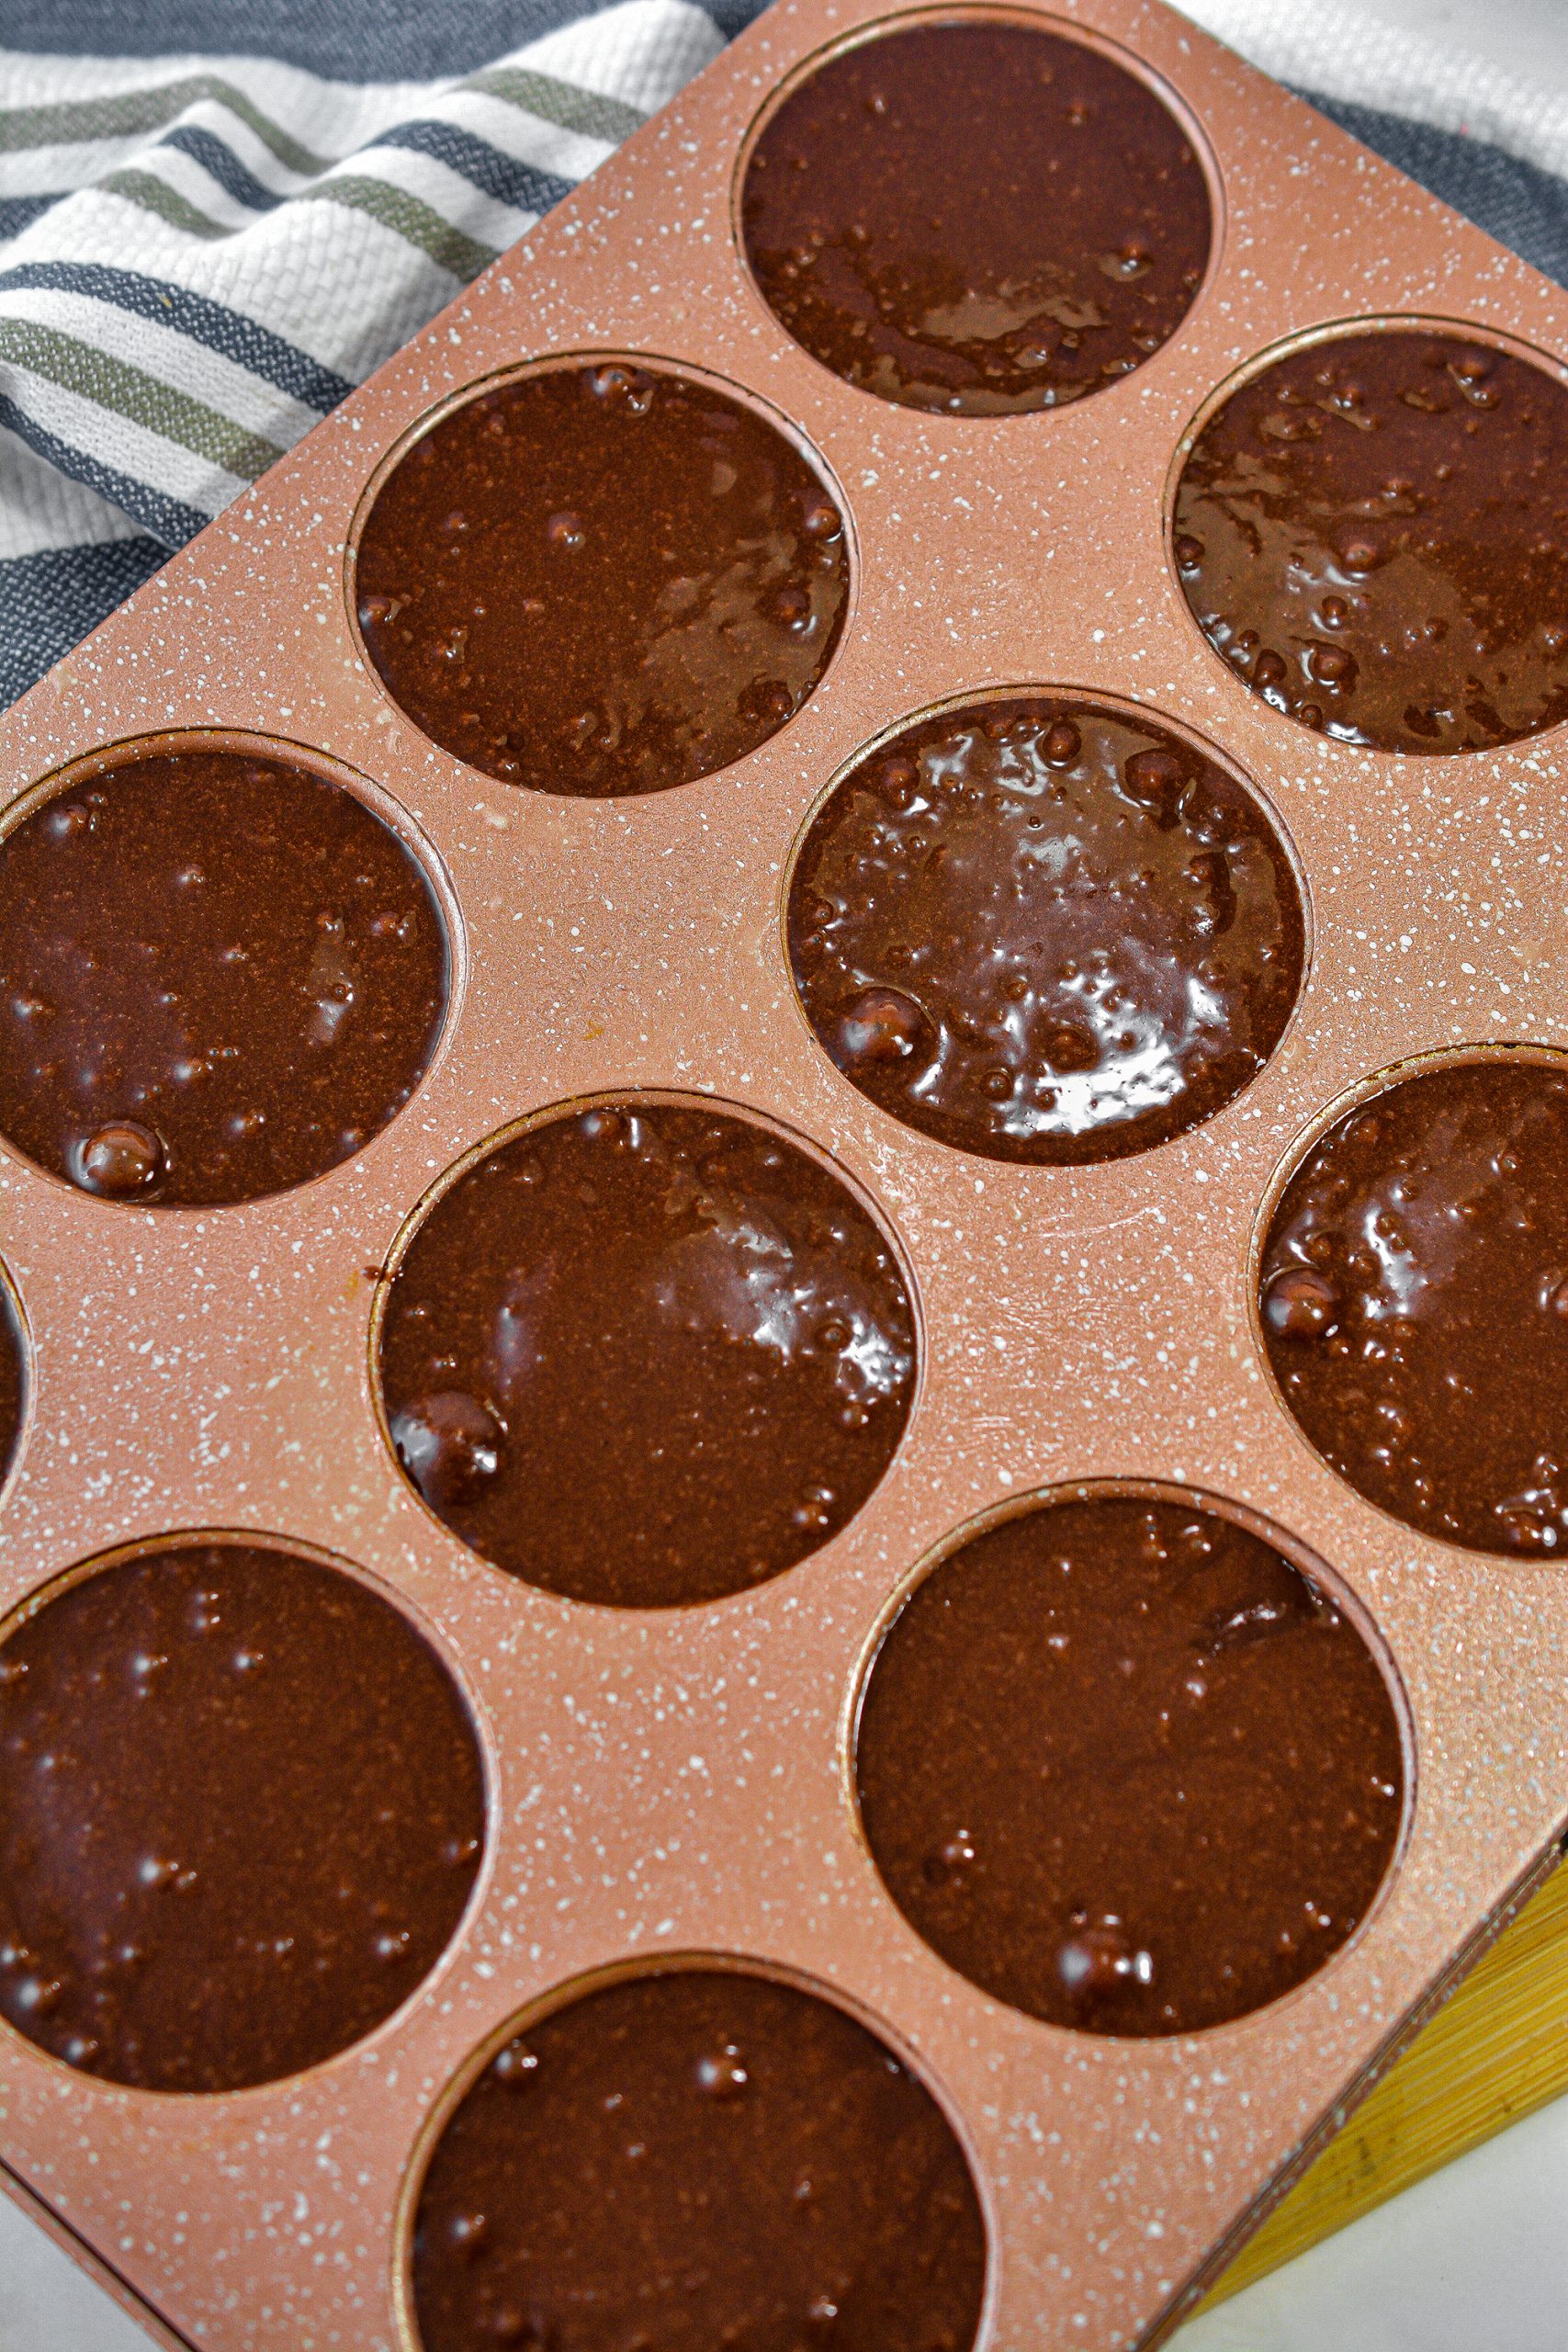 Fill the cups of the muffin tin the rest of the way with the brownie batter.